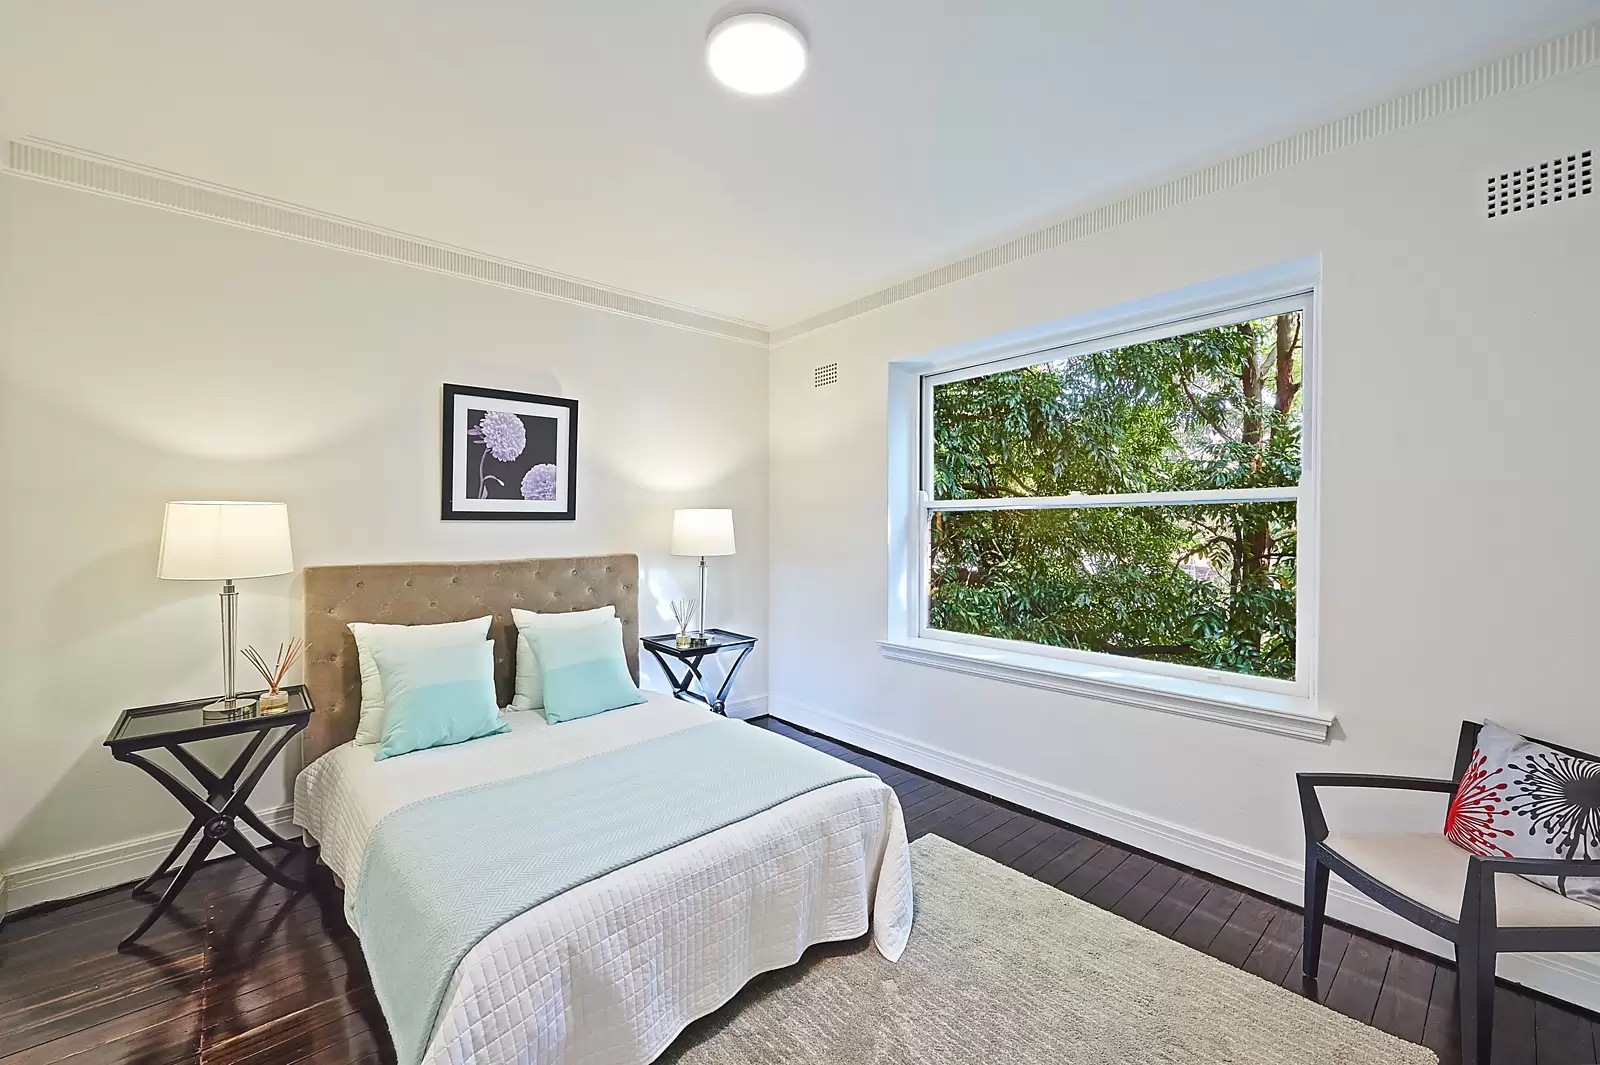 Photo #6: 2/499 New South Head Road, Double Bay - Sold by Sydney Sotheby's International Realty